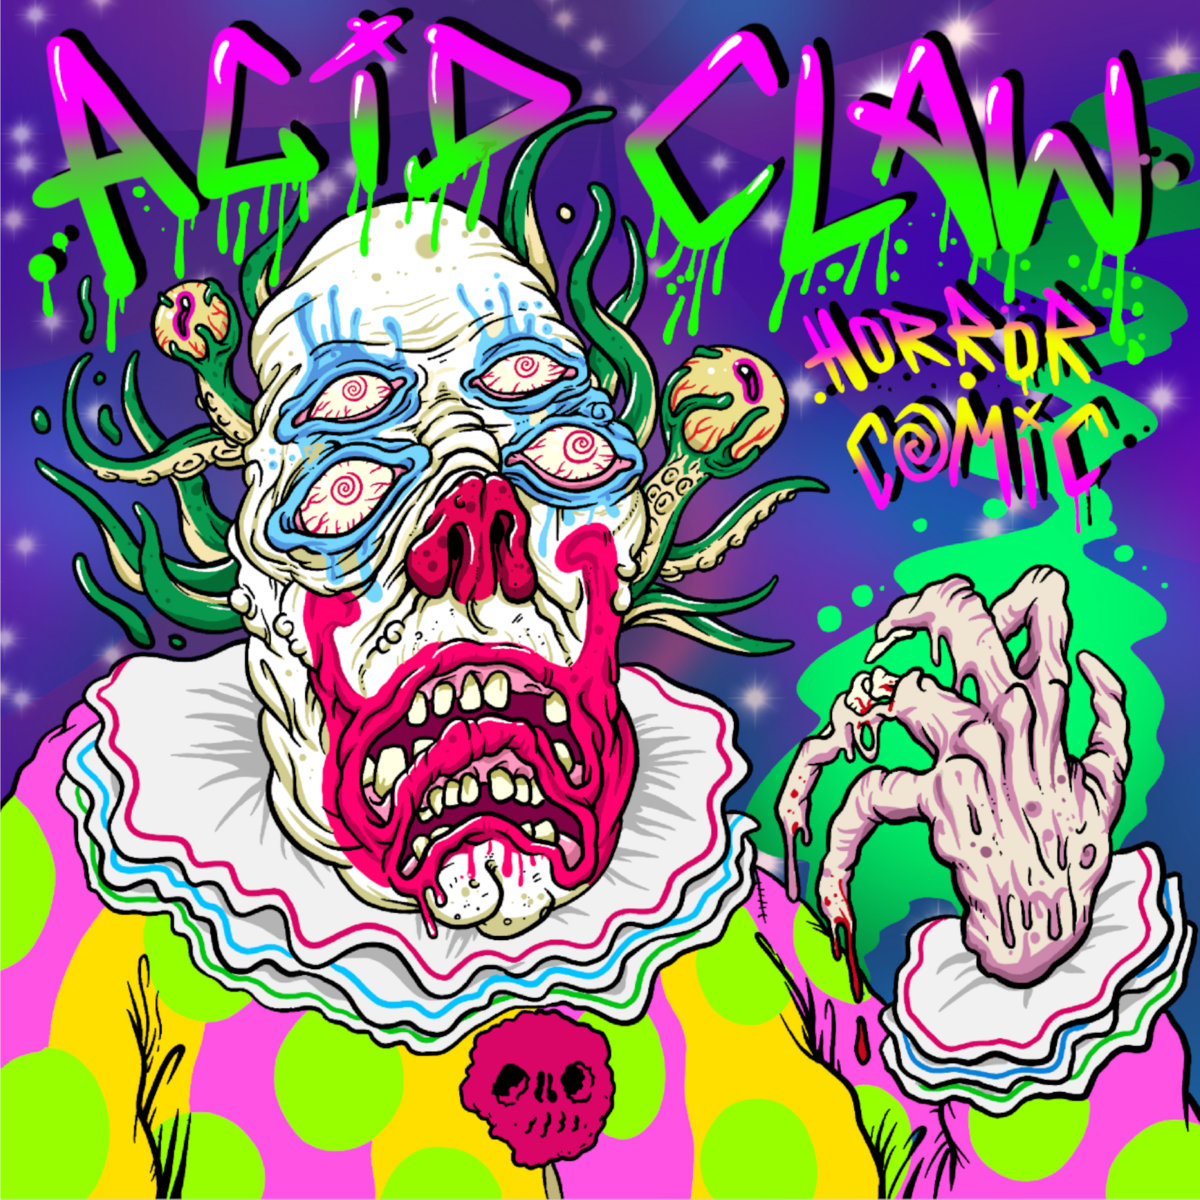 www.facebook.com/acidclawofficial